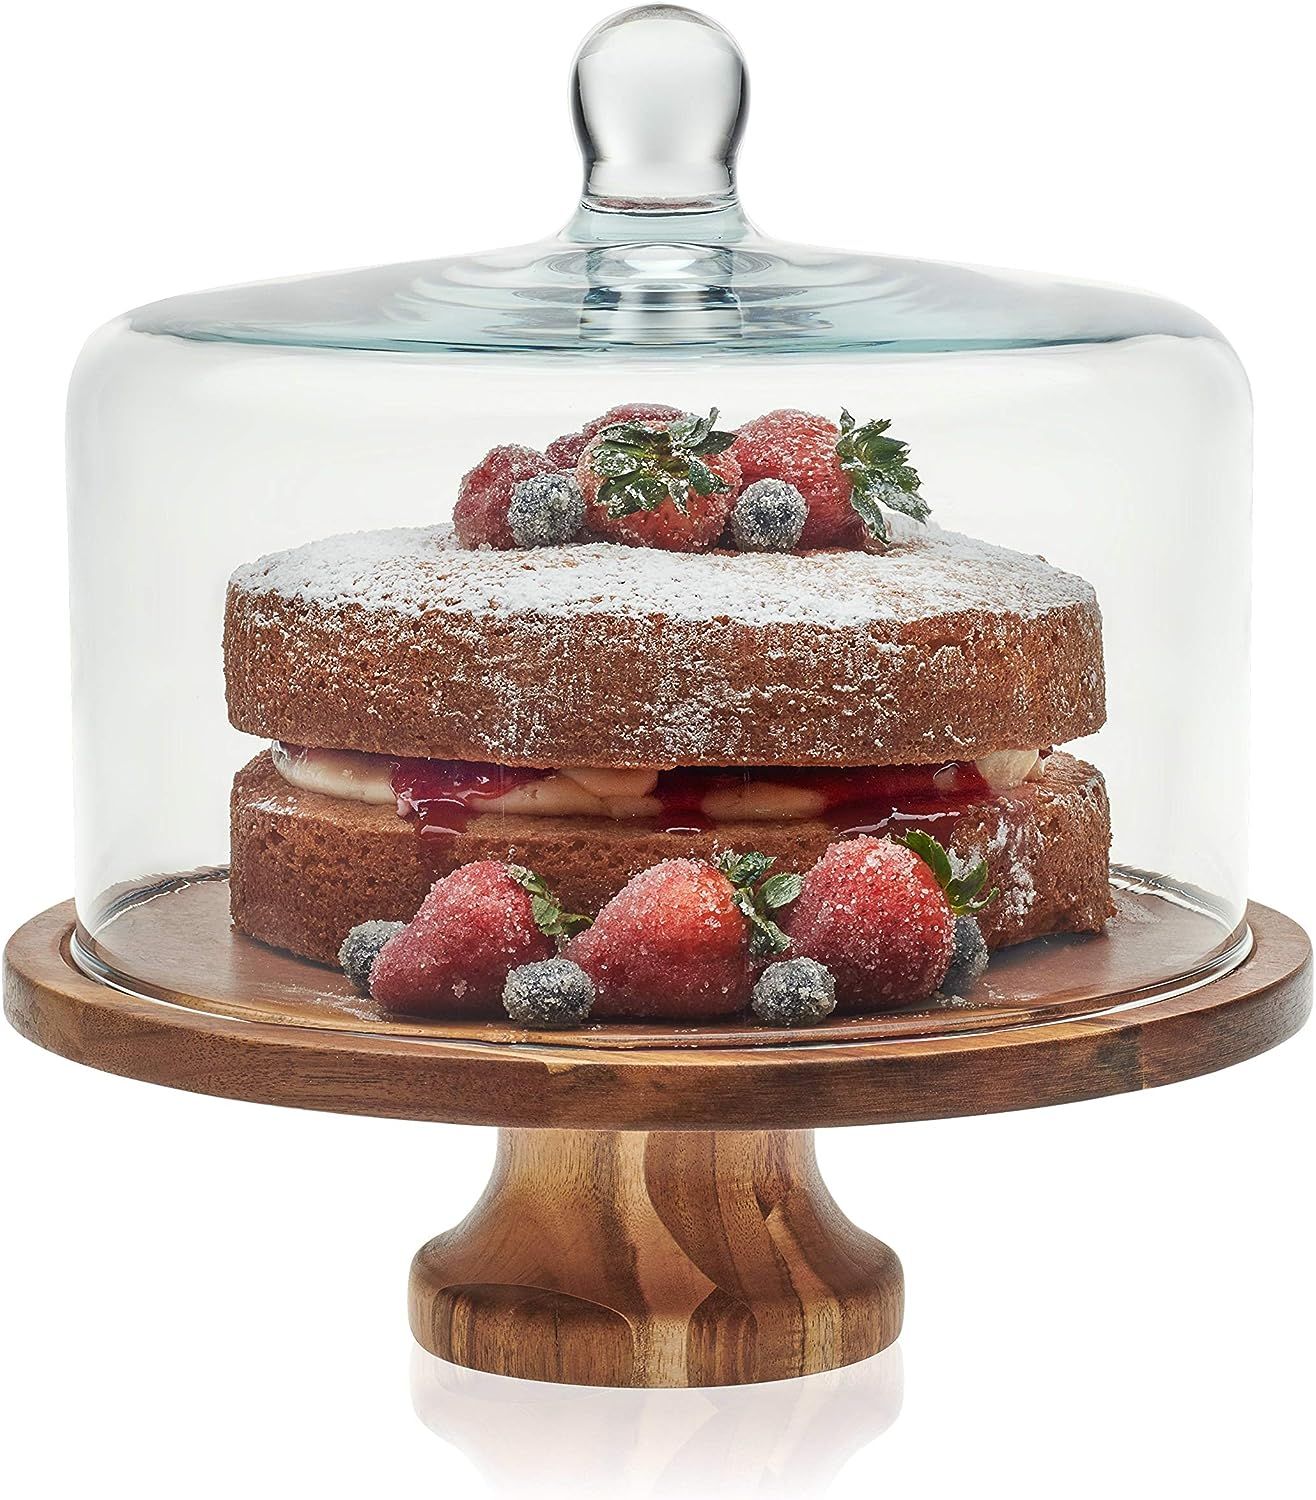 Libbey Acaciawood Footed Round Wood Server Cake Stand with Glass Dome | Amazon (US)